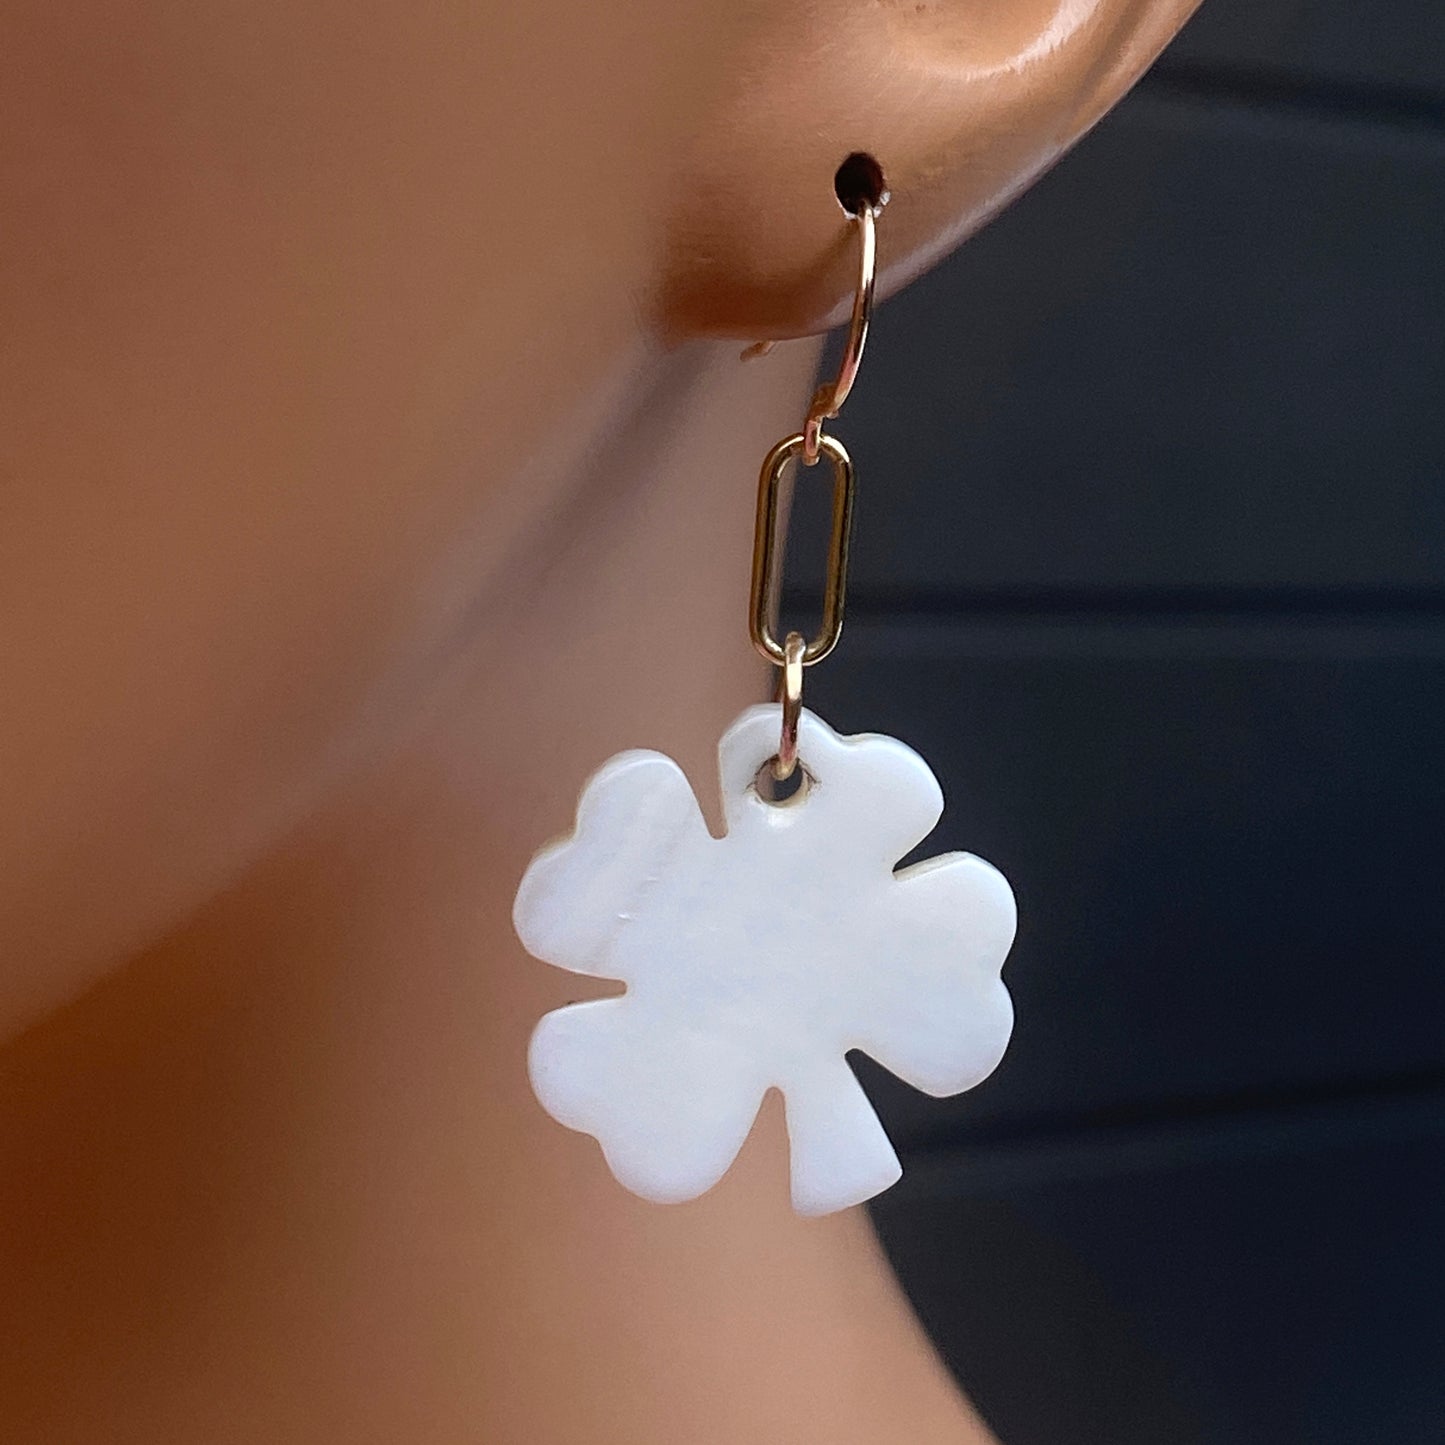 Mother of Pearl Clover Earrings